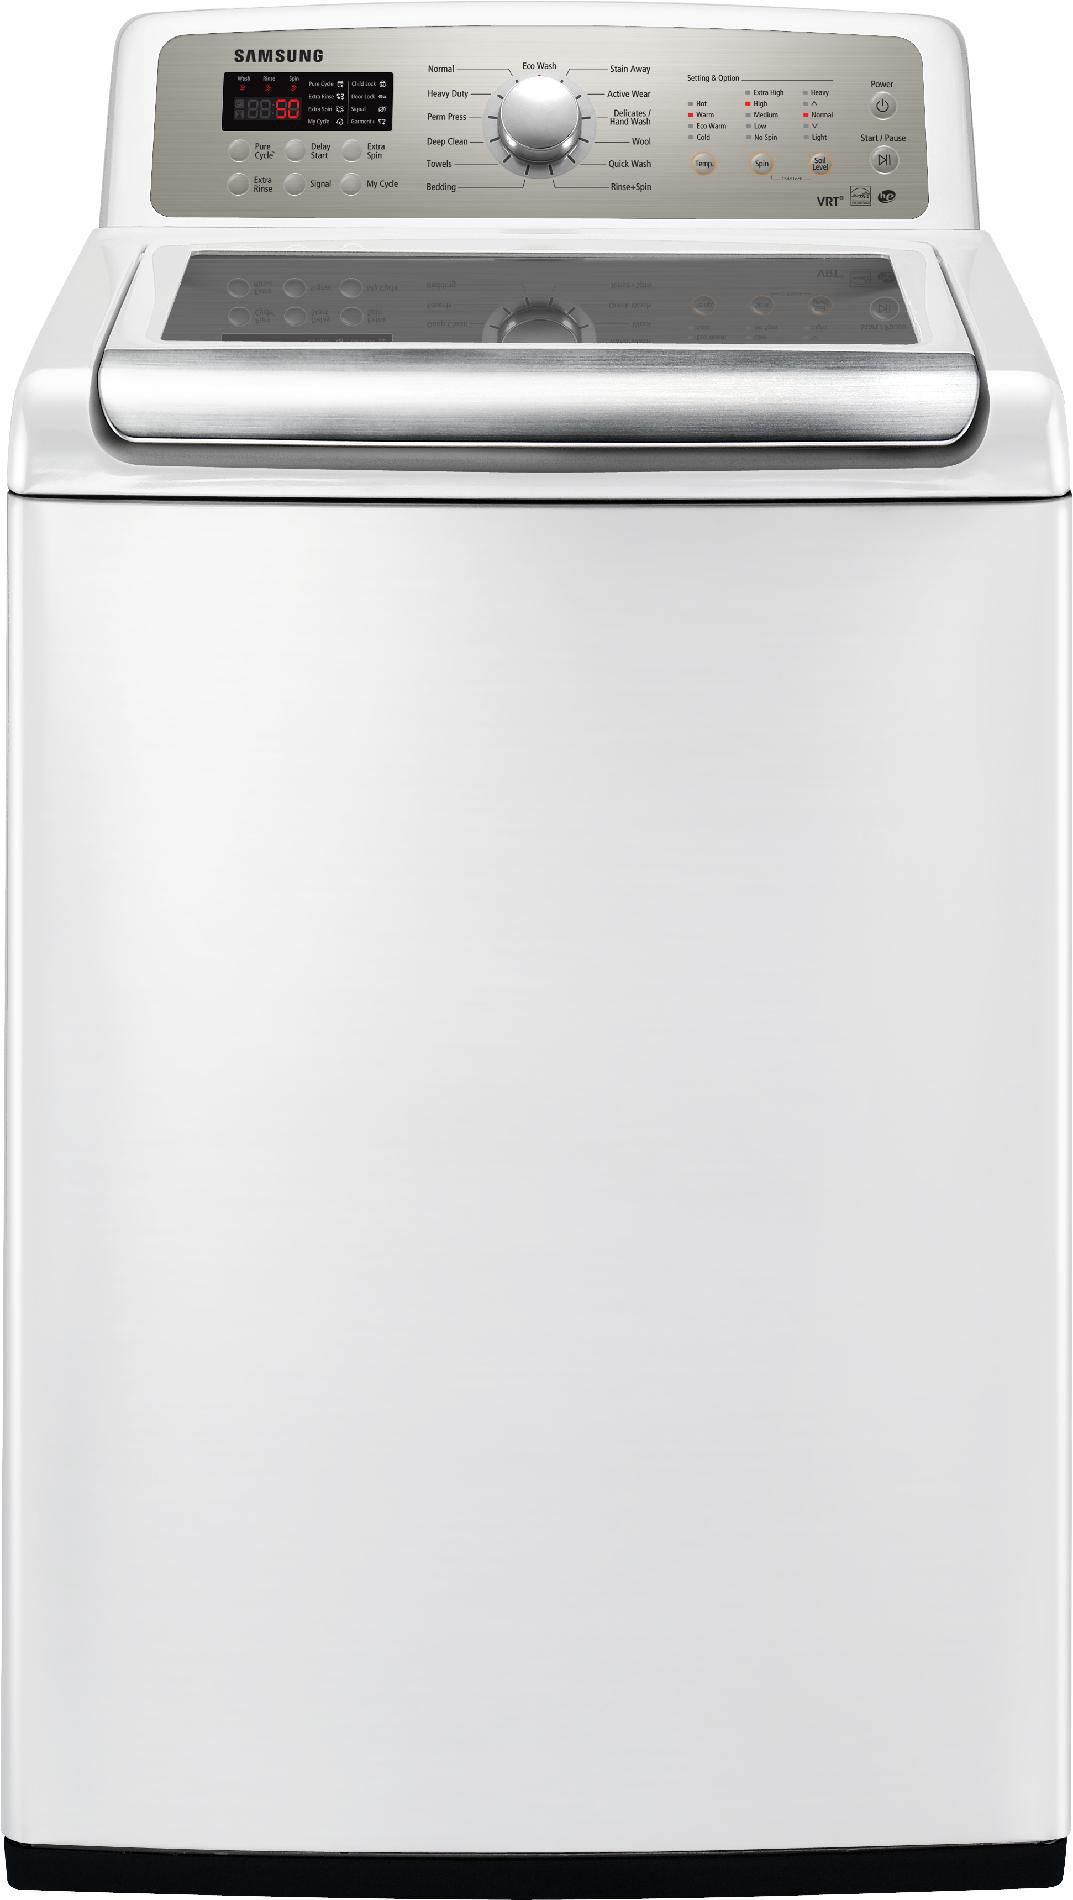 Samsung 4.8 cu. ft. High-Efficiency Top Load Washer - White